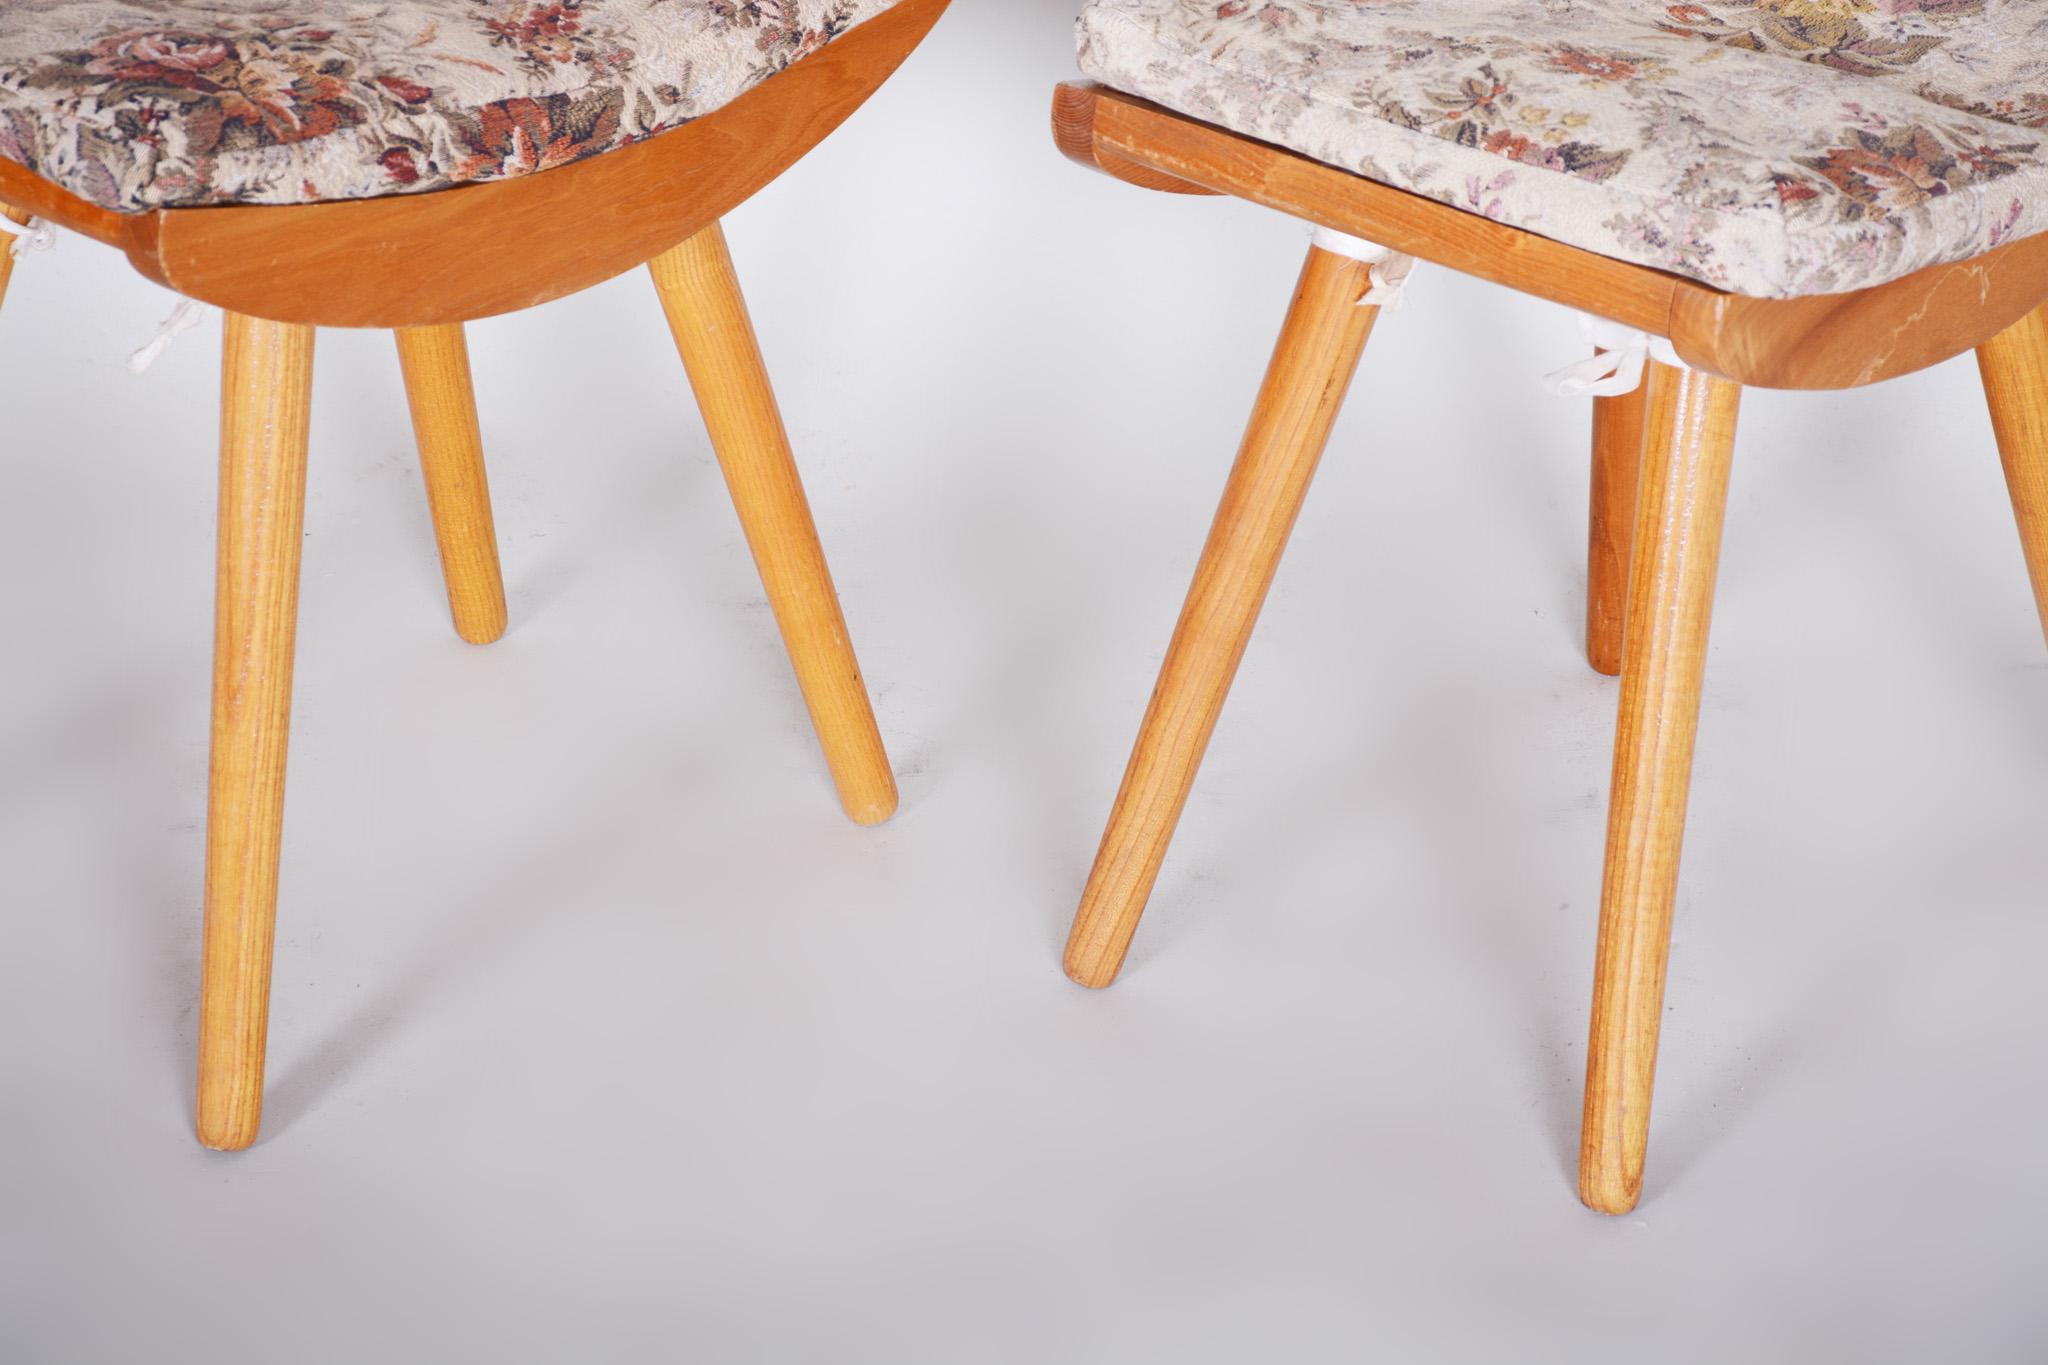 Fabric Pair of Midcentury Ash Stools, 1960s, Original Preserved Condition For Sale